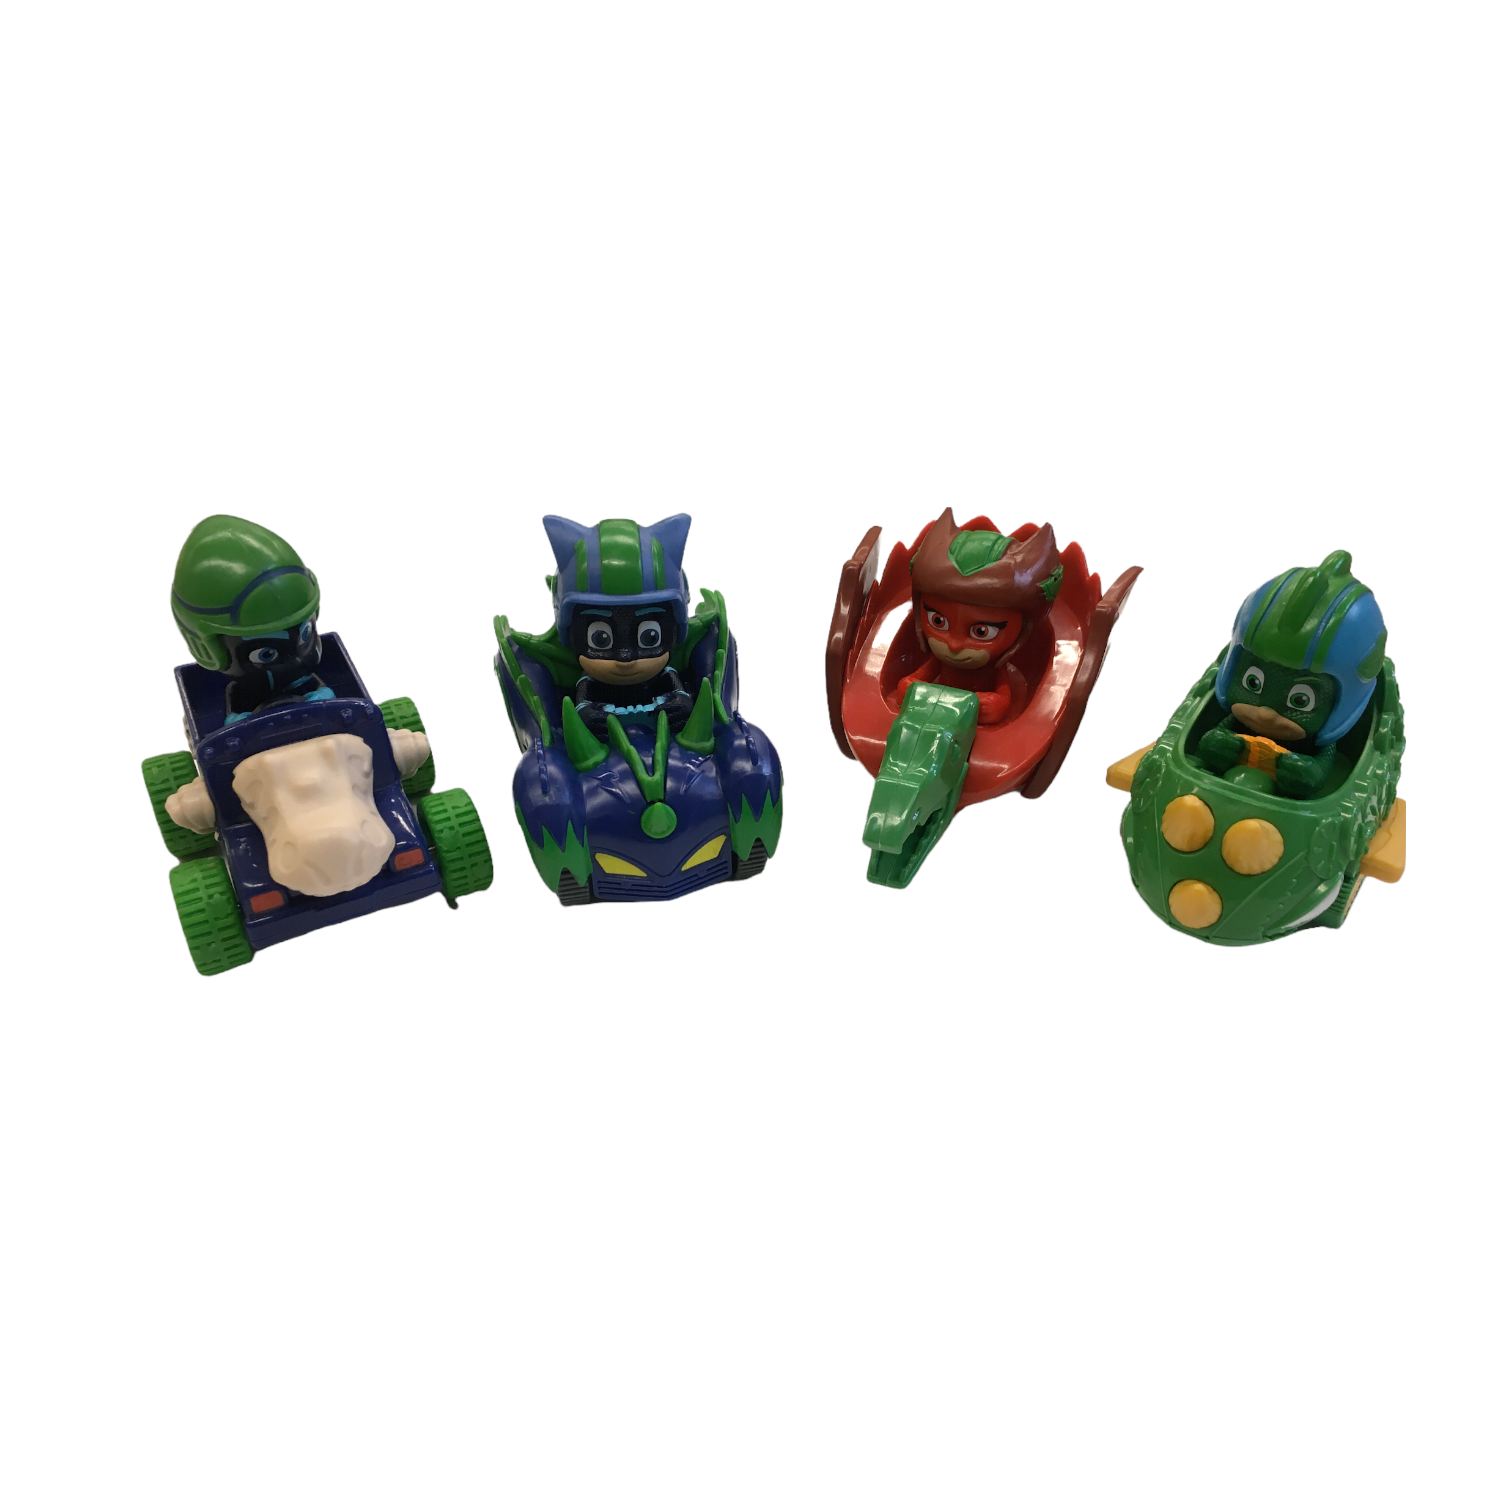 4pc Mini Pj Mask Cars, Toys

#resalerocks #pipsqueakresale #vancouverwa #portland #reusereducerecycle #fashiononabudget #chooseused #consignment #savemoney #shoplocal #weship #keepusopen #shoplocalonline #resale #resaleboutique #mommyandme #minime #fashion #reseller                                                                                                                                      Cross posted, items are located at #PipsqueakResaleBoutique, payments accepted: cash, paypal & credit cards. Any flaws will be described in the comments. More pictures available with link above. Local pick up available at the #VancouverMall, tax will be added (not included in price), shipping available (not included in price, *Clothing, shoes, books & DVDs for $6.99; please contact regarding shipment of toys or other larger items), item can be placed on hold with communication, message with any questions. Join Pipsqueak Resale - Online to see all the new items! Follow us on IG @pipsqueakresale & Thanks for looking! Due to the nature of consignment, any known flaws will be described; ALL SHIPPED SALES ARE FINAL. All items are currently located inside Pipsqueak Resale Boutique as a store front items purchased on location before items are prepared for shipment will be refunded.